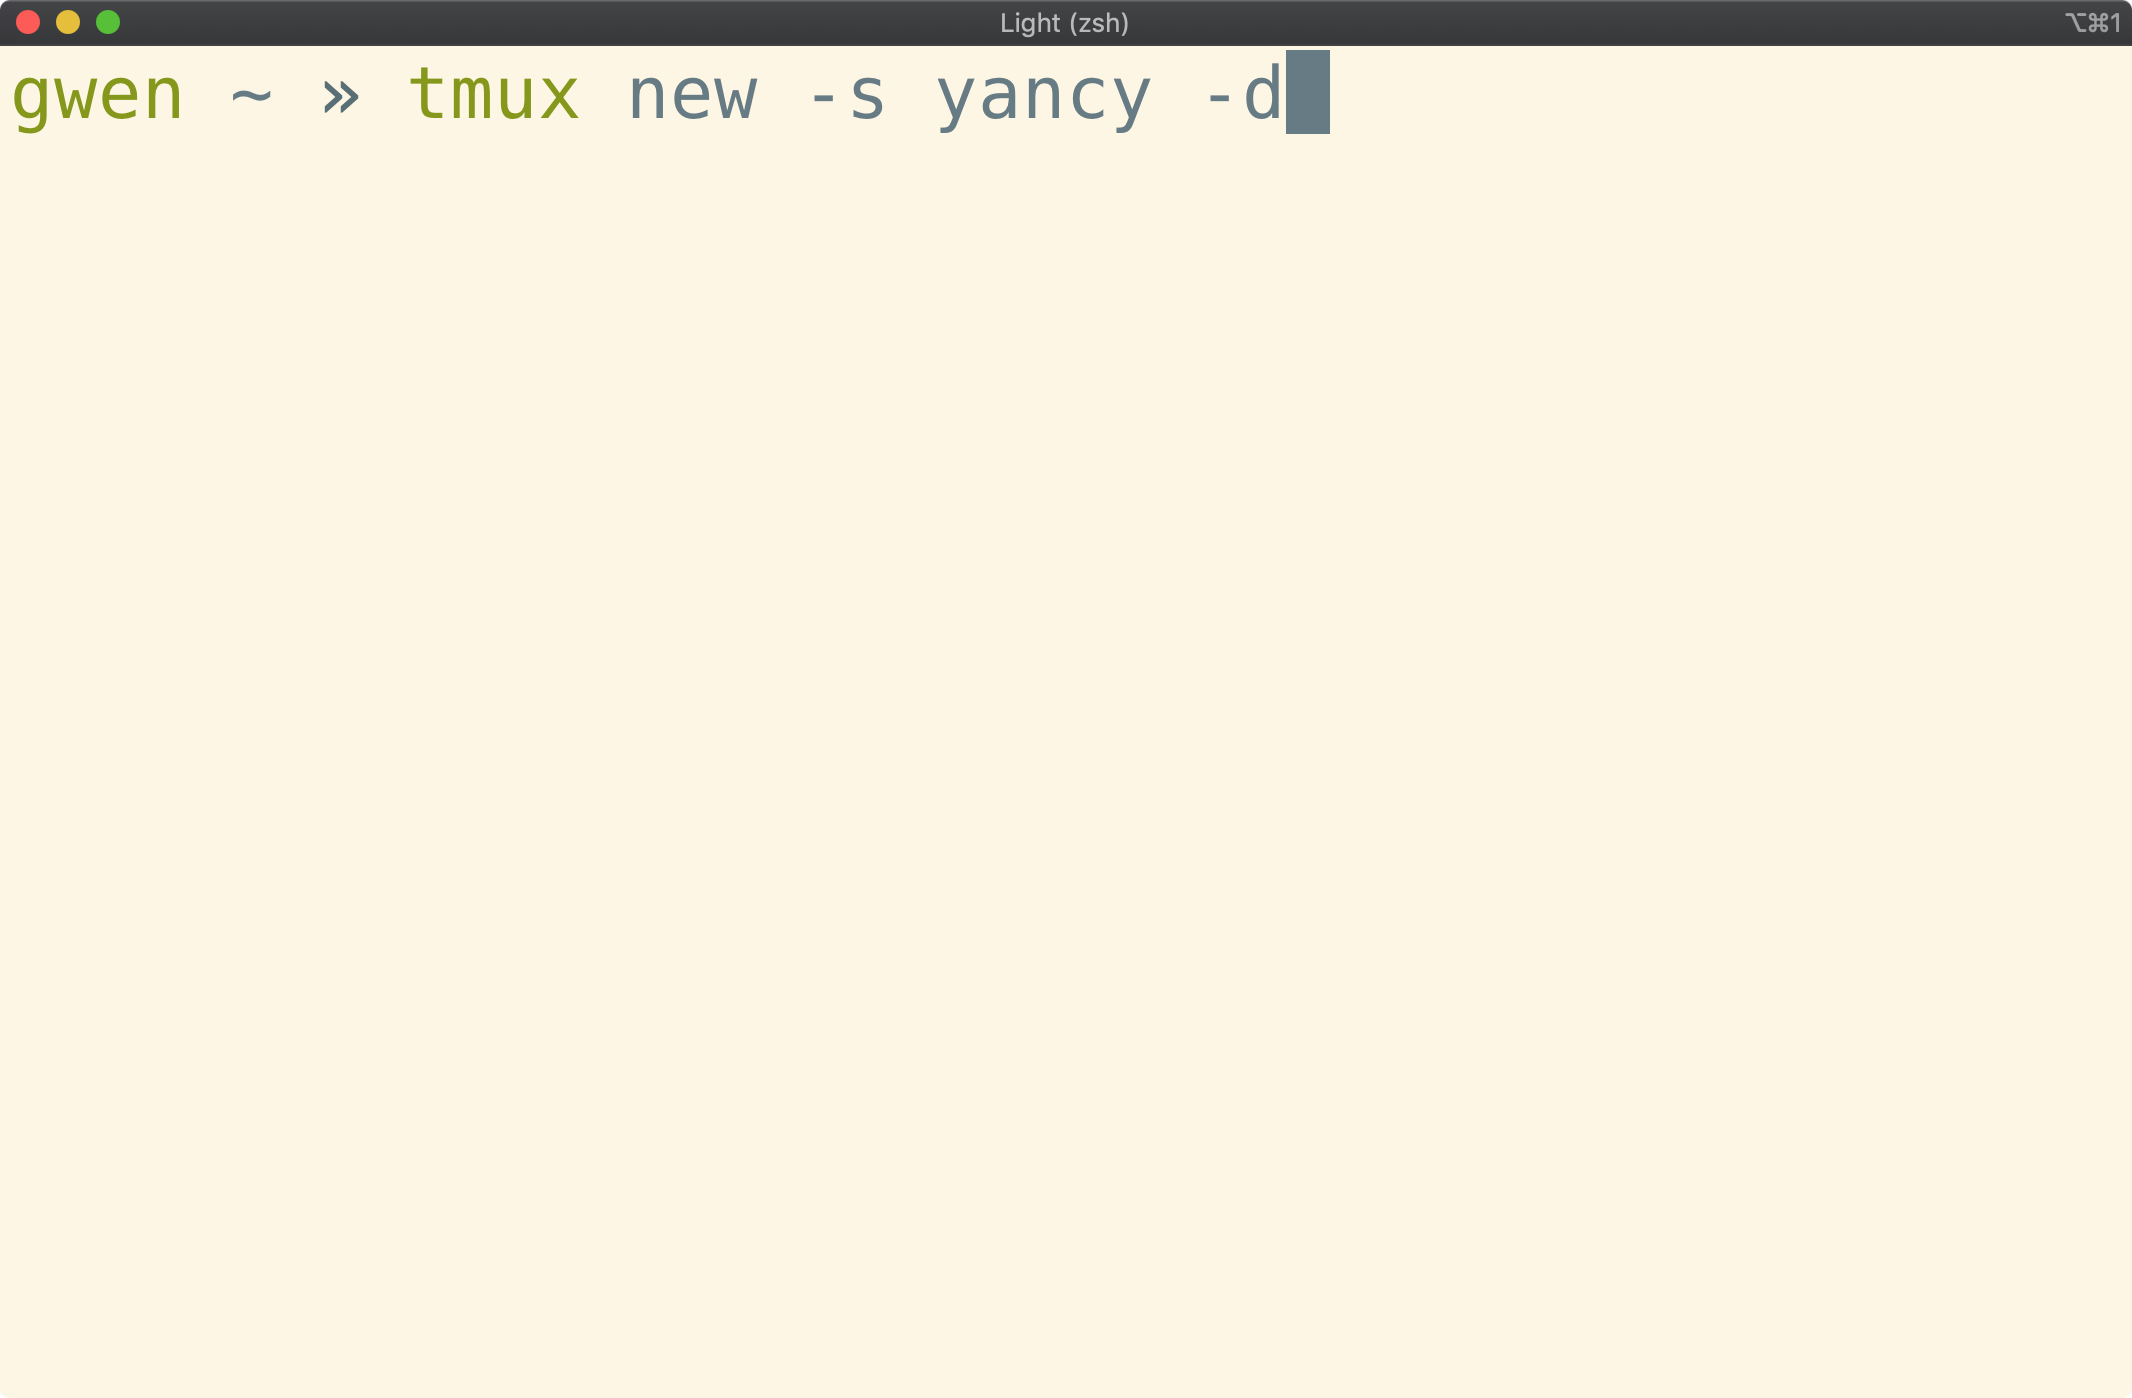 Shell window with "tmux new" command executed"